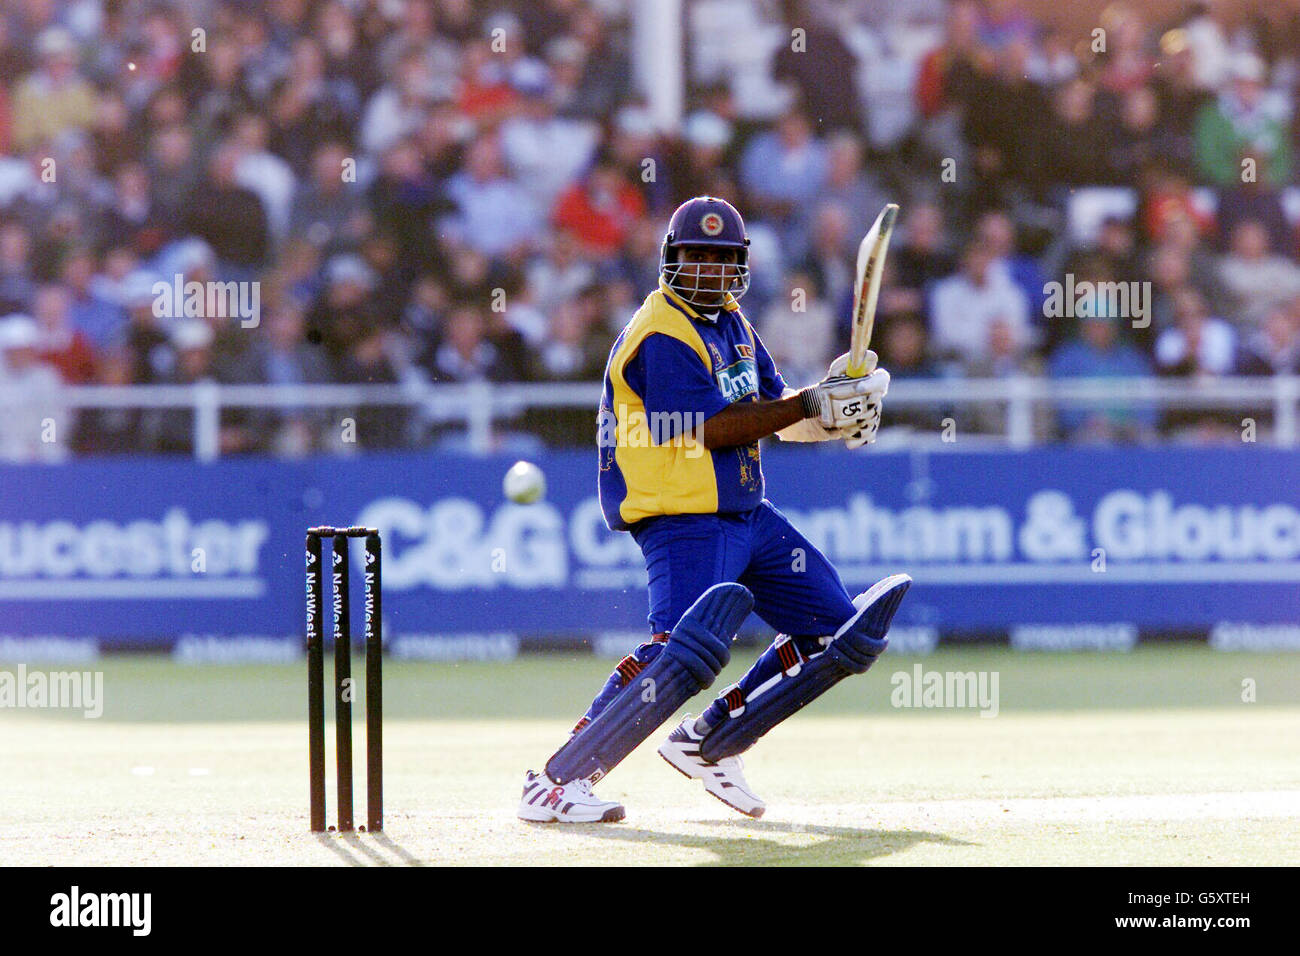 A Sri Lankan cricketer in action during the fourth game in The NatWest triangular series, between England and Sri Lanka at Headingley, Leeds Stock Photo